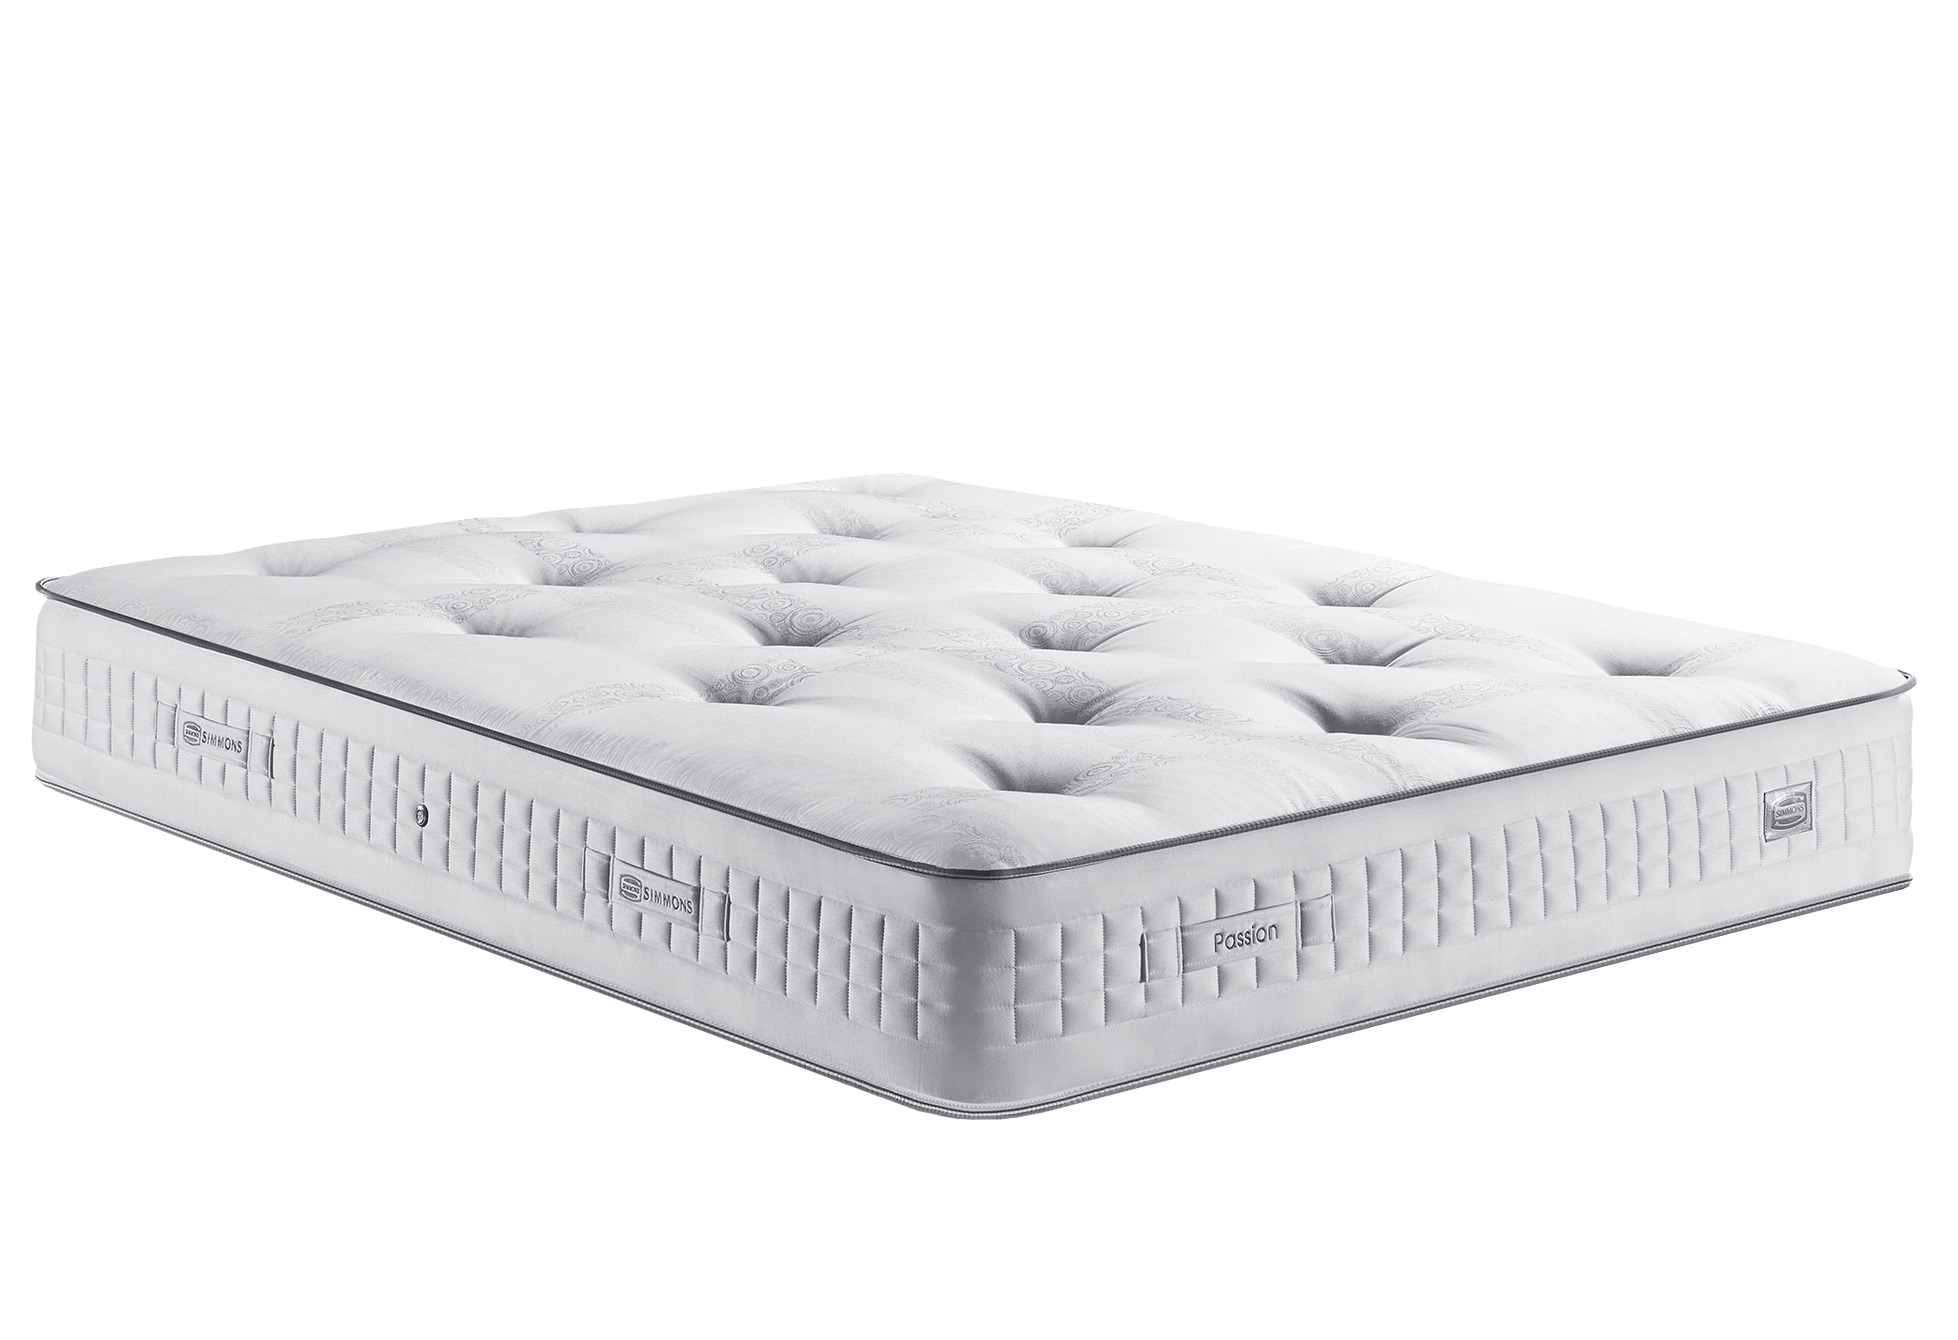 Matelas Ressorts Simmons PASSION FERME  160x200 (Queen size)